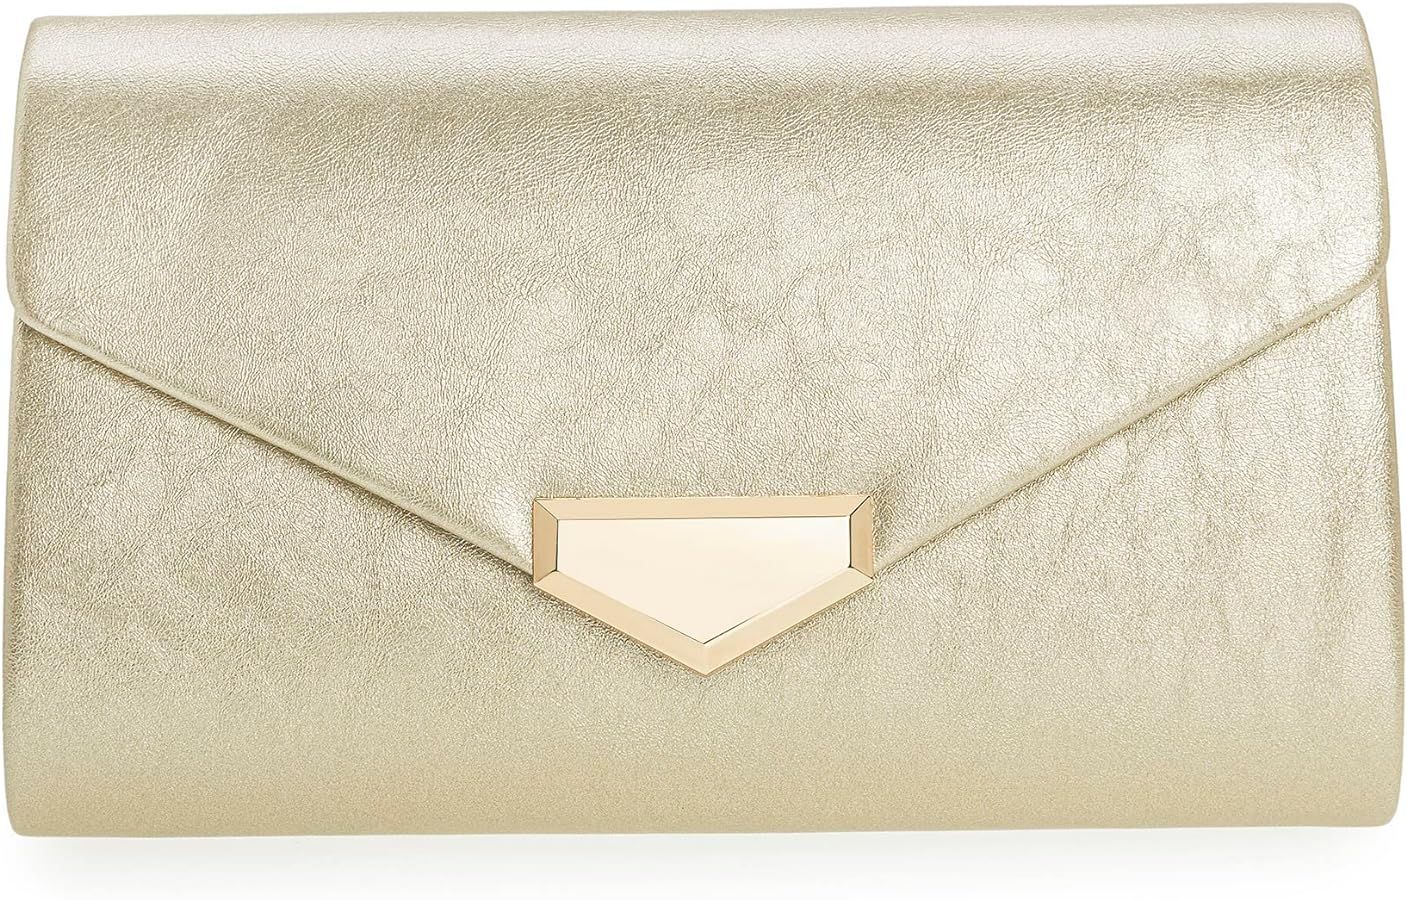 CHARMING TAILOR PU Clutch Purse for Women Evening Bag Chic Clutch Handbag for Special-occasion | Amazon (US)